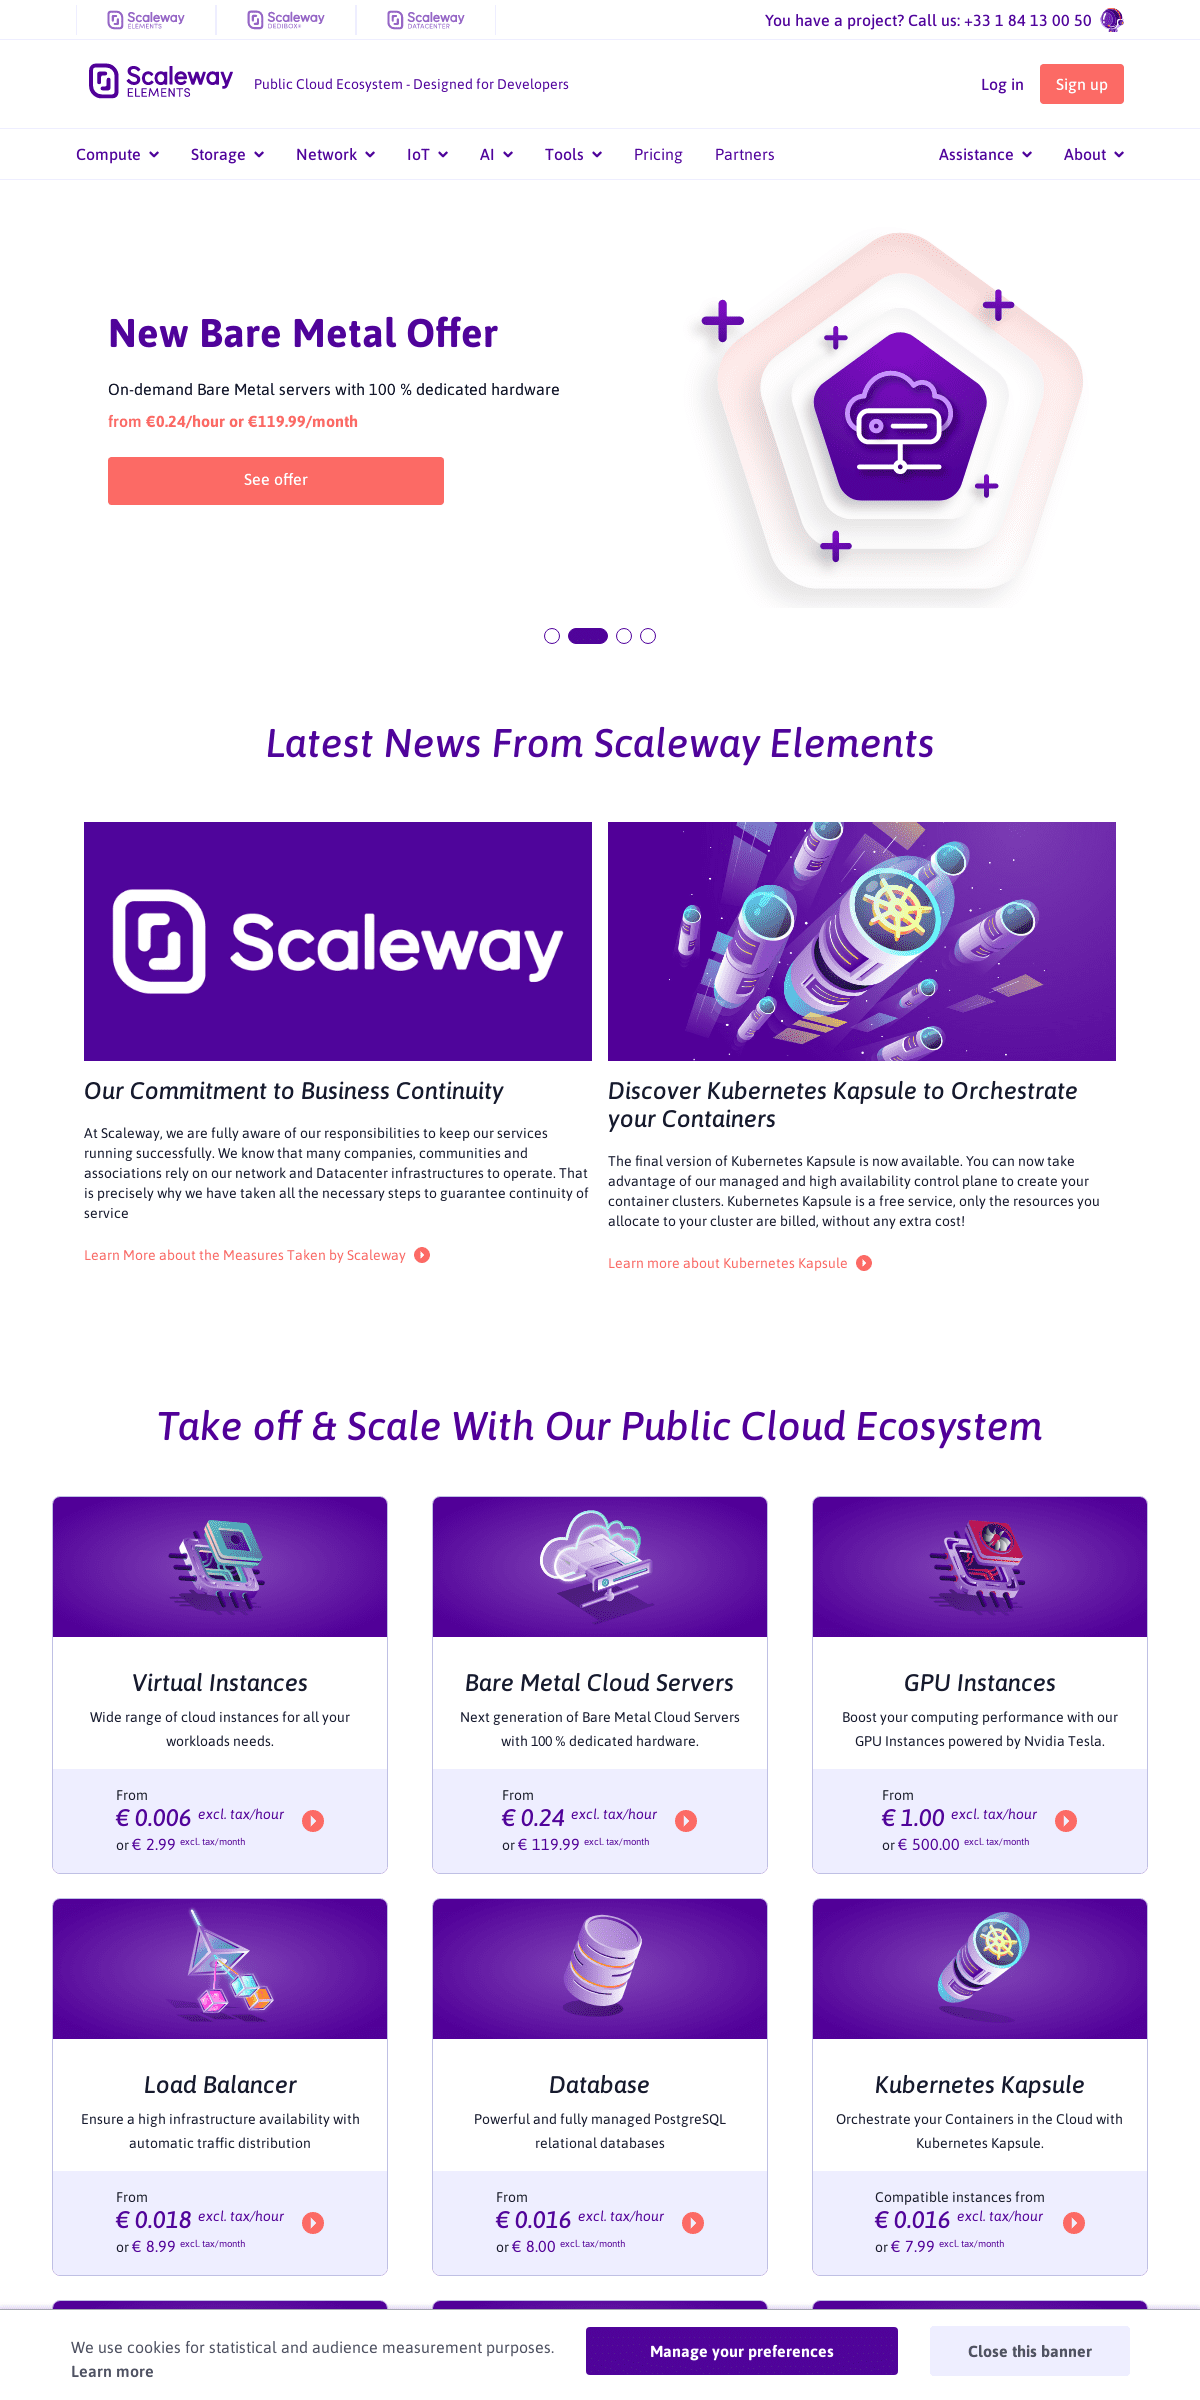 A complete backup of scaleway.com